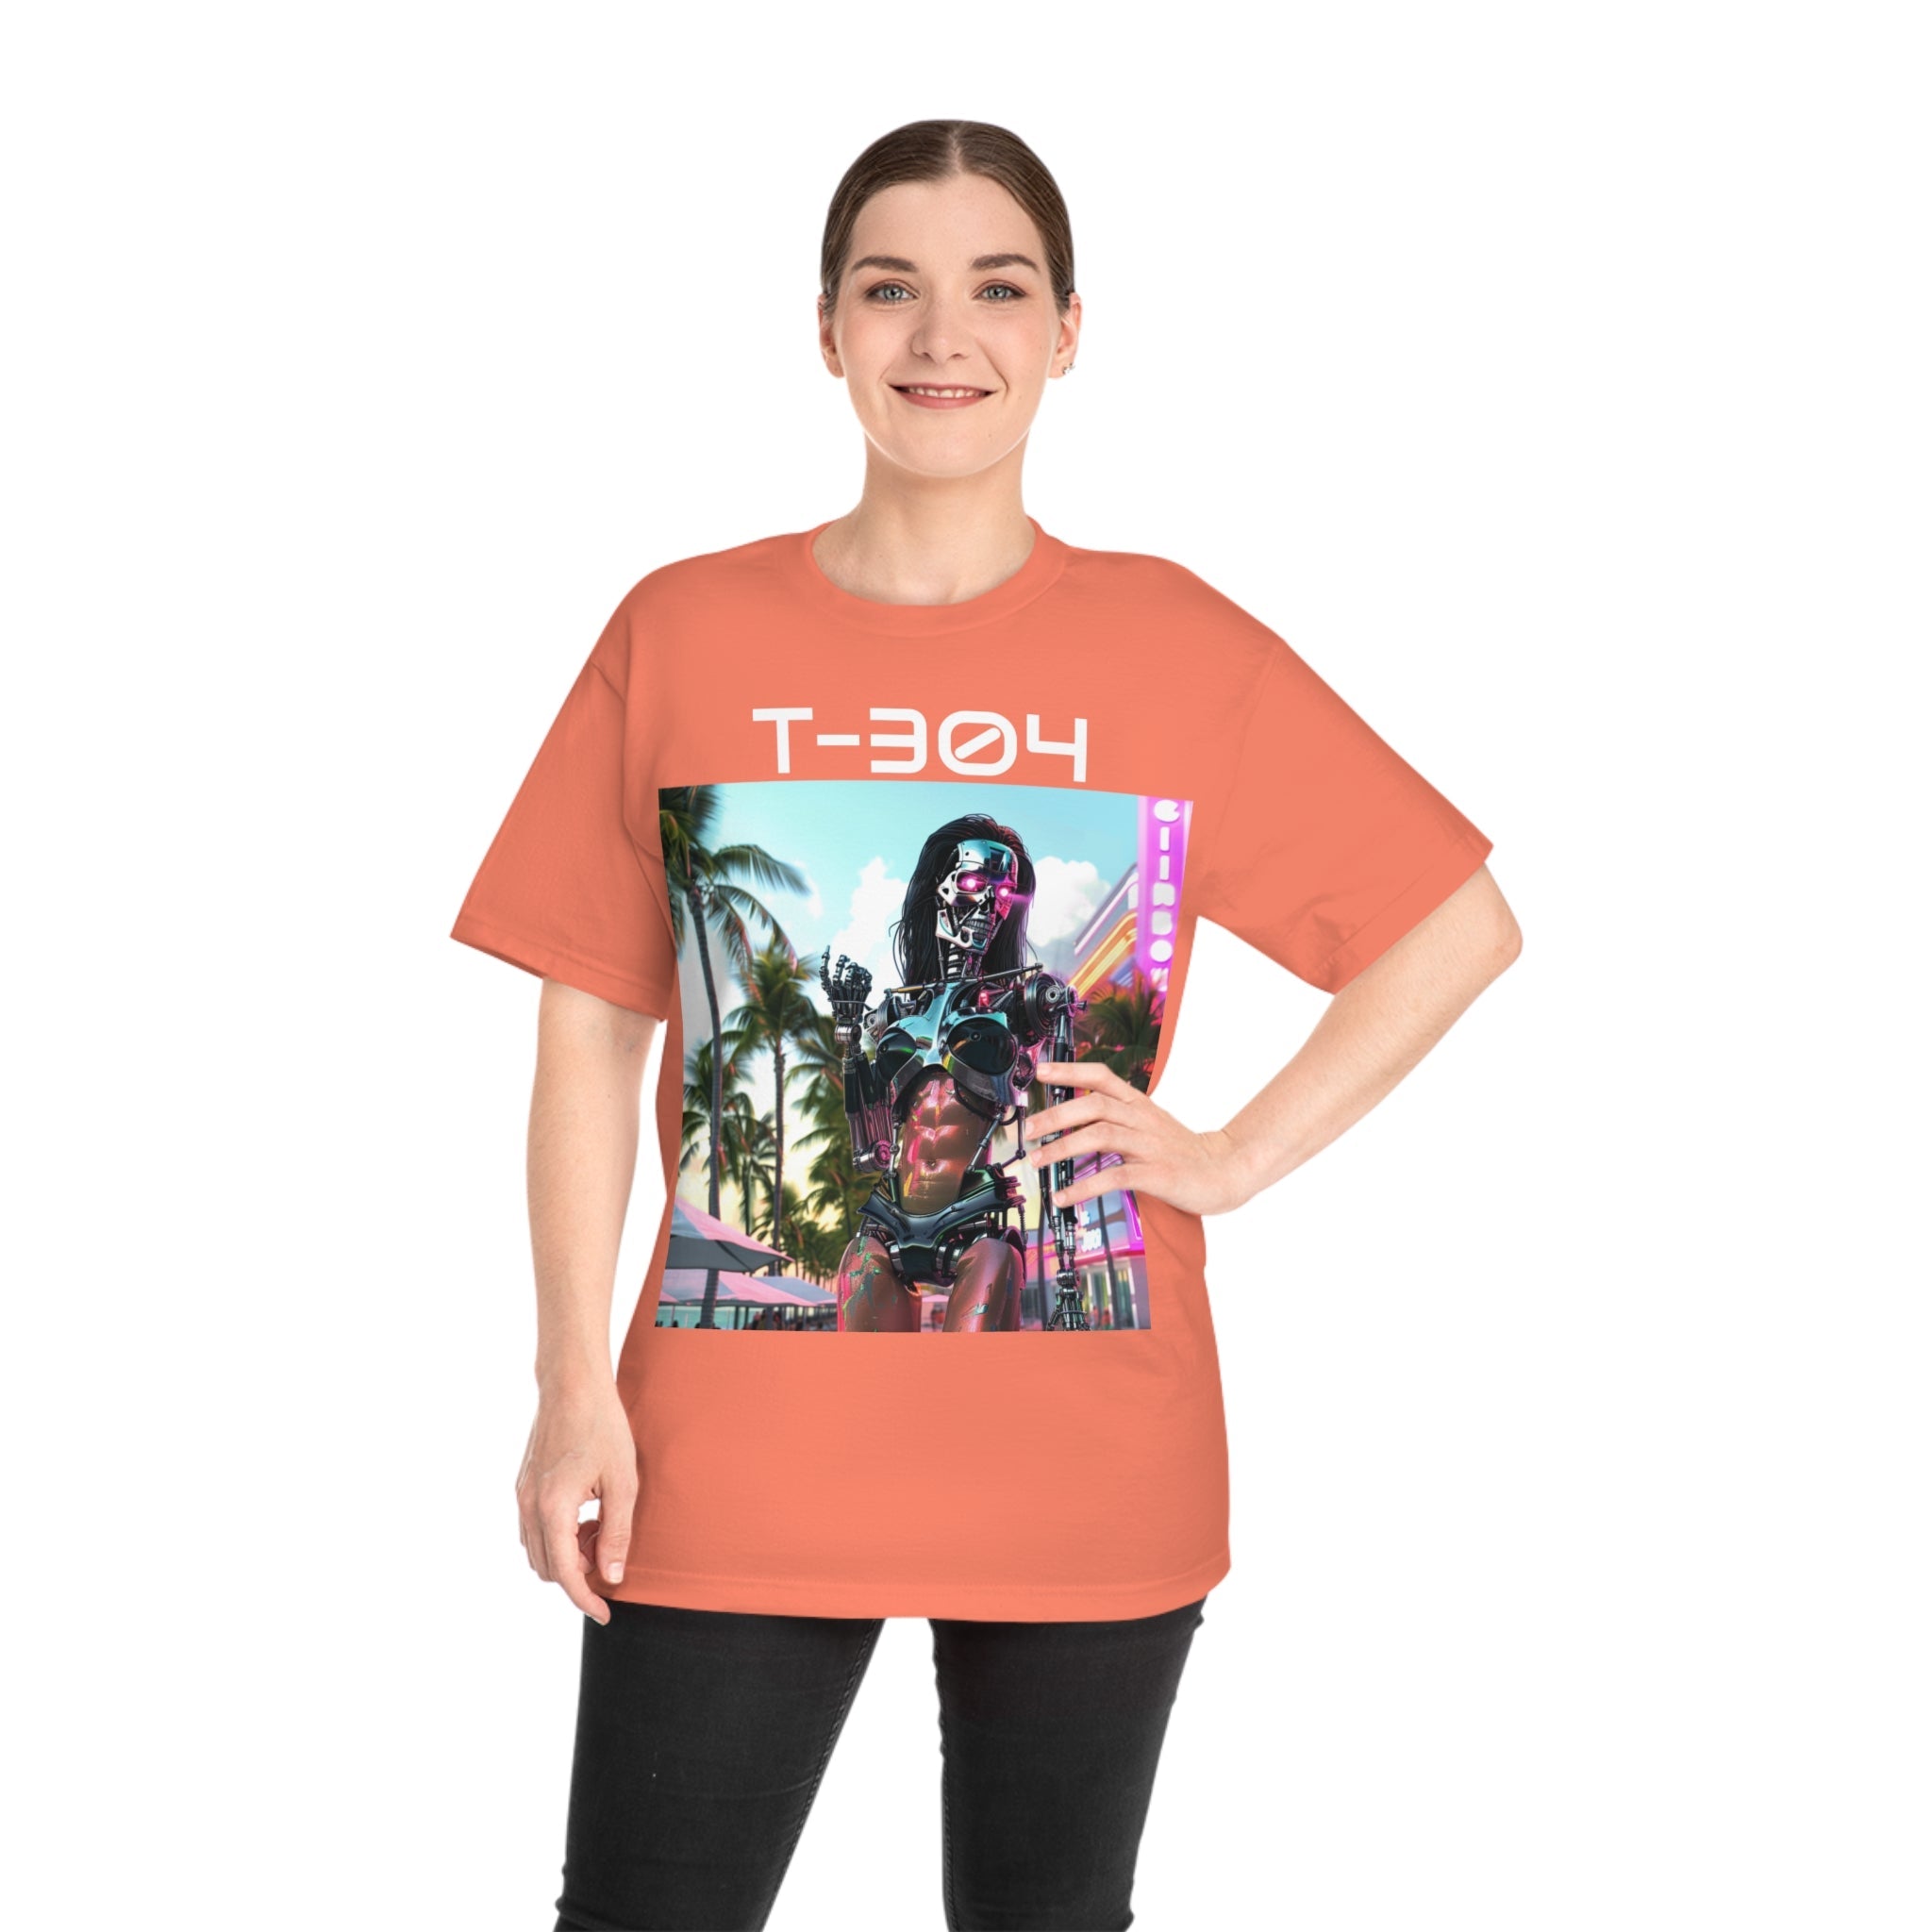 Future Chic: Retro Sci-Fi T-304 'On-Fleek Assassin Glam Gal Unisex Hammer™ T-Shirt - The Ultimate Fusion of Fashion and Fantasy